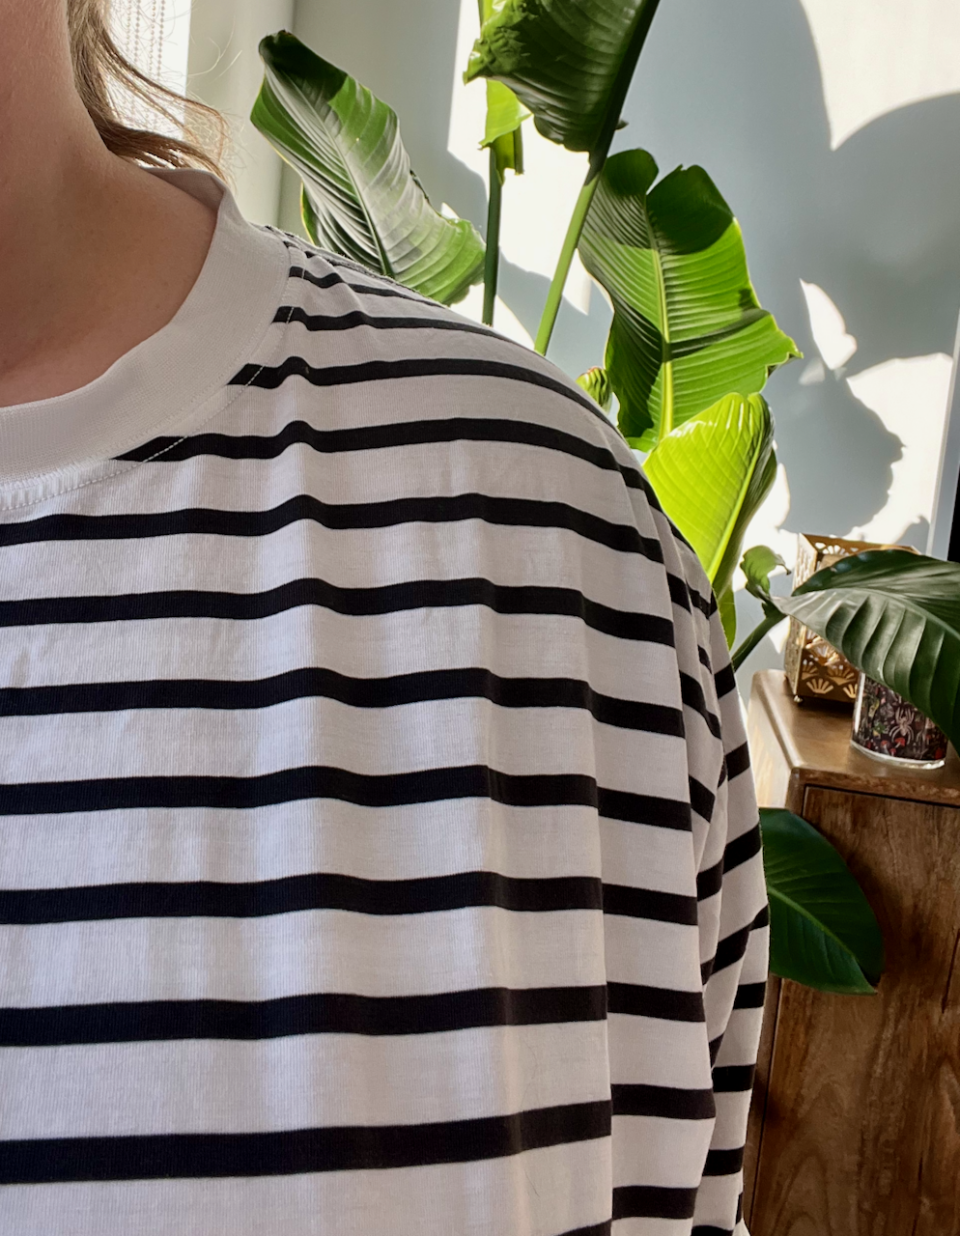 I love the wide, flat hem with ribbing on the collar of this t-shirt.